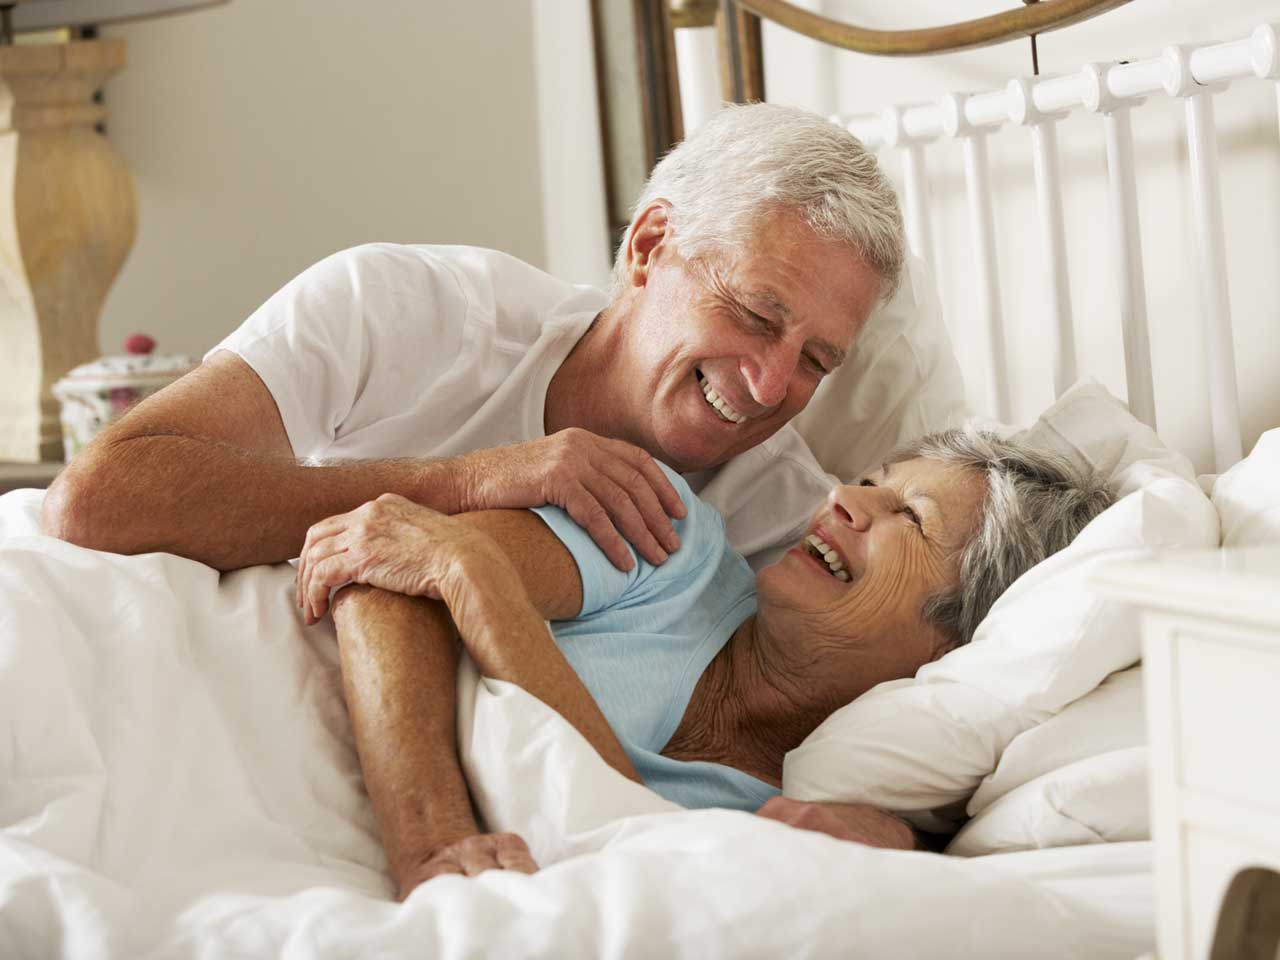 Sex over 60 - Risks, Benefits and Sex Tips for Over Sixties